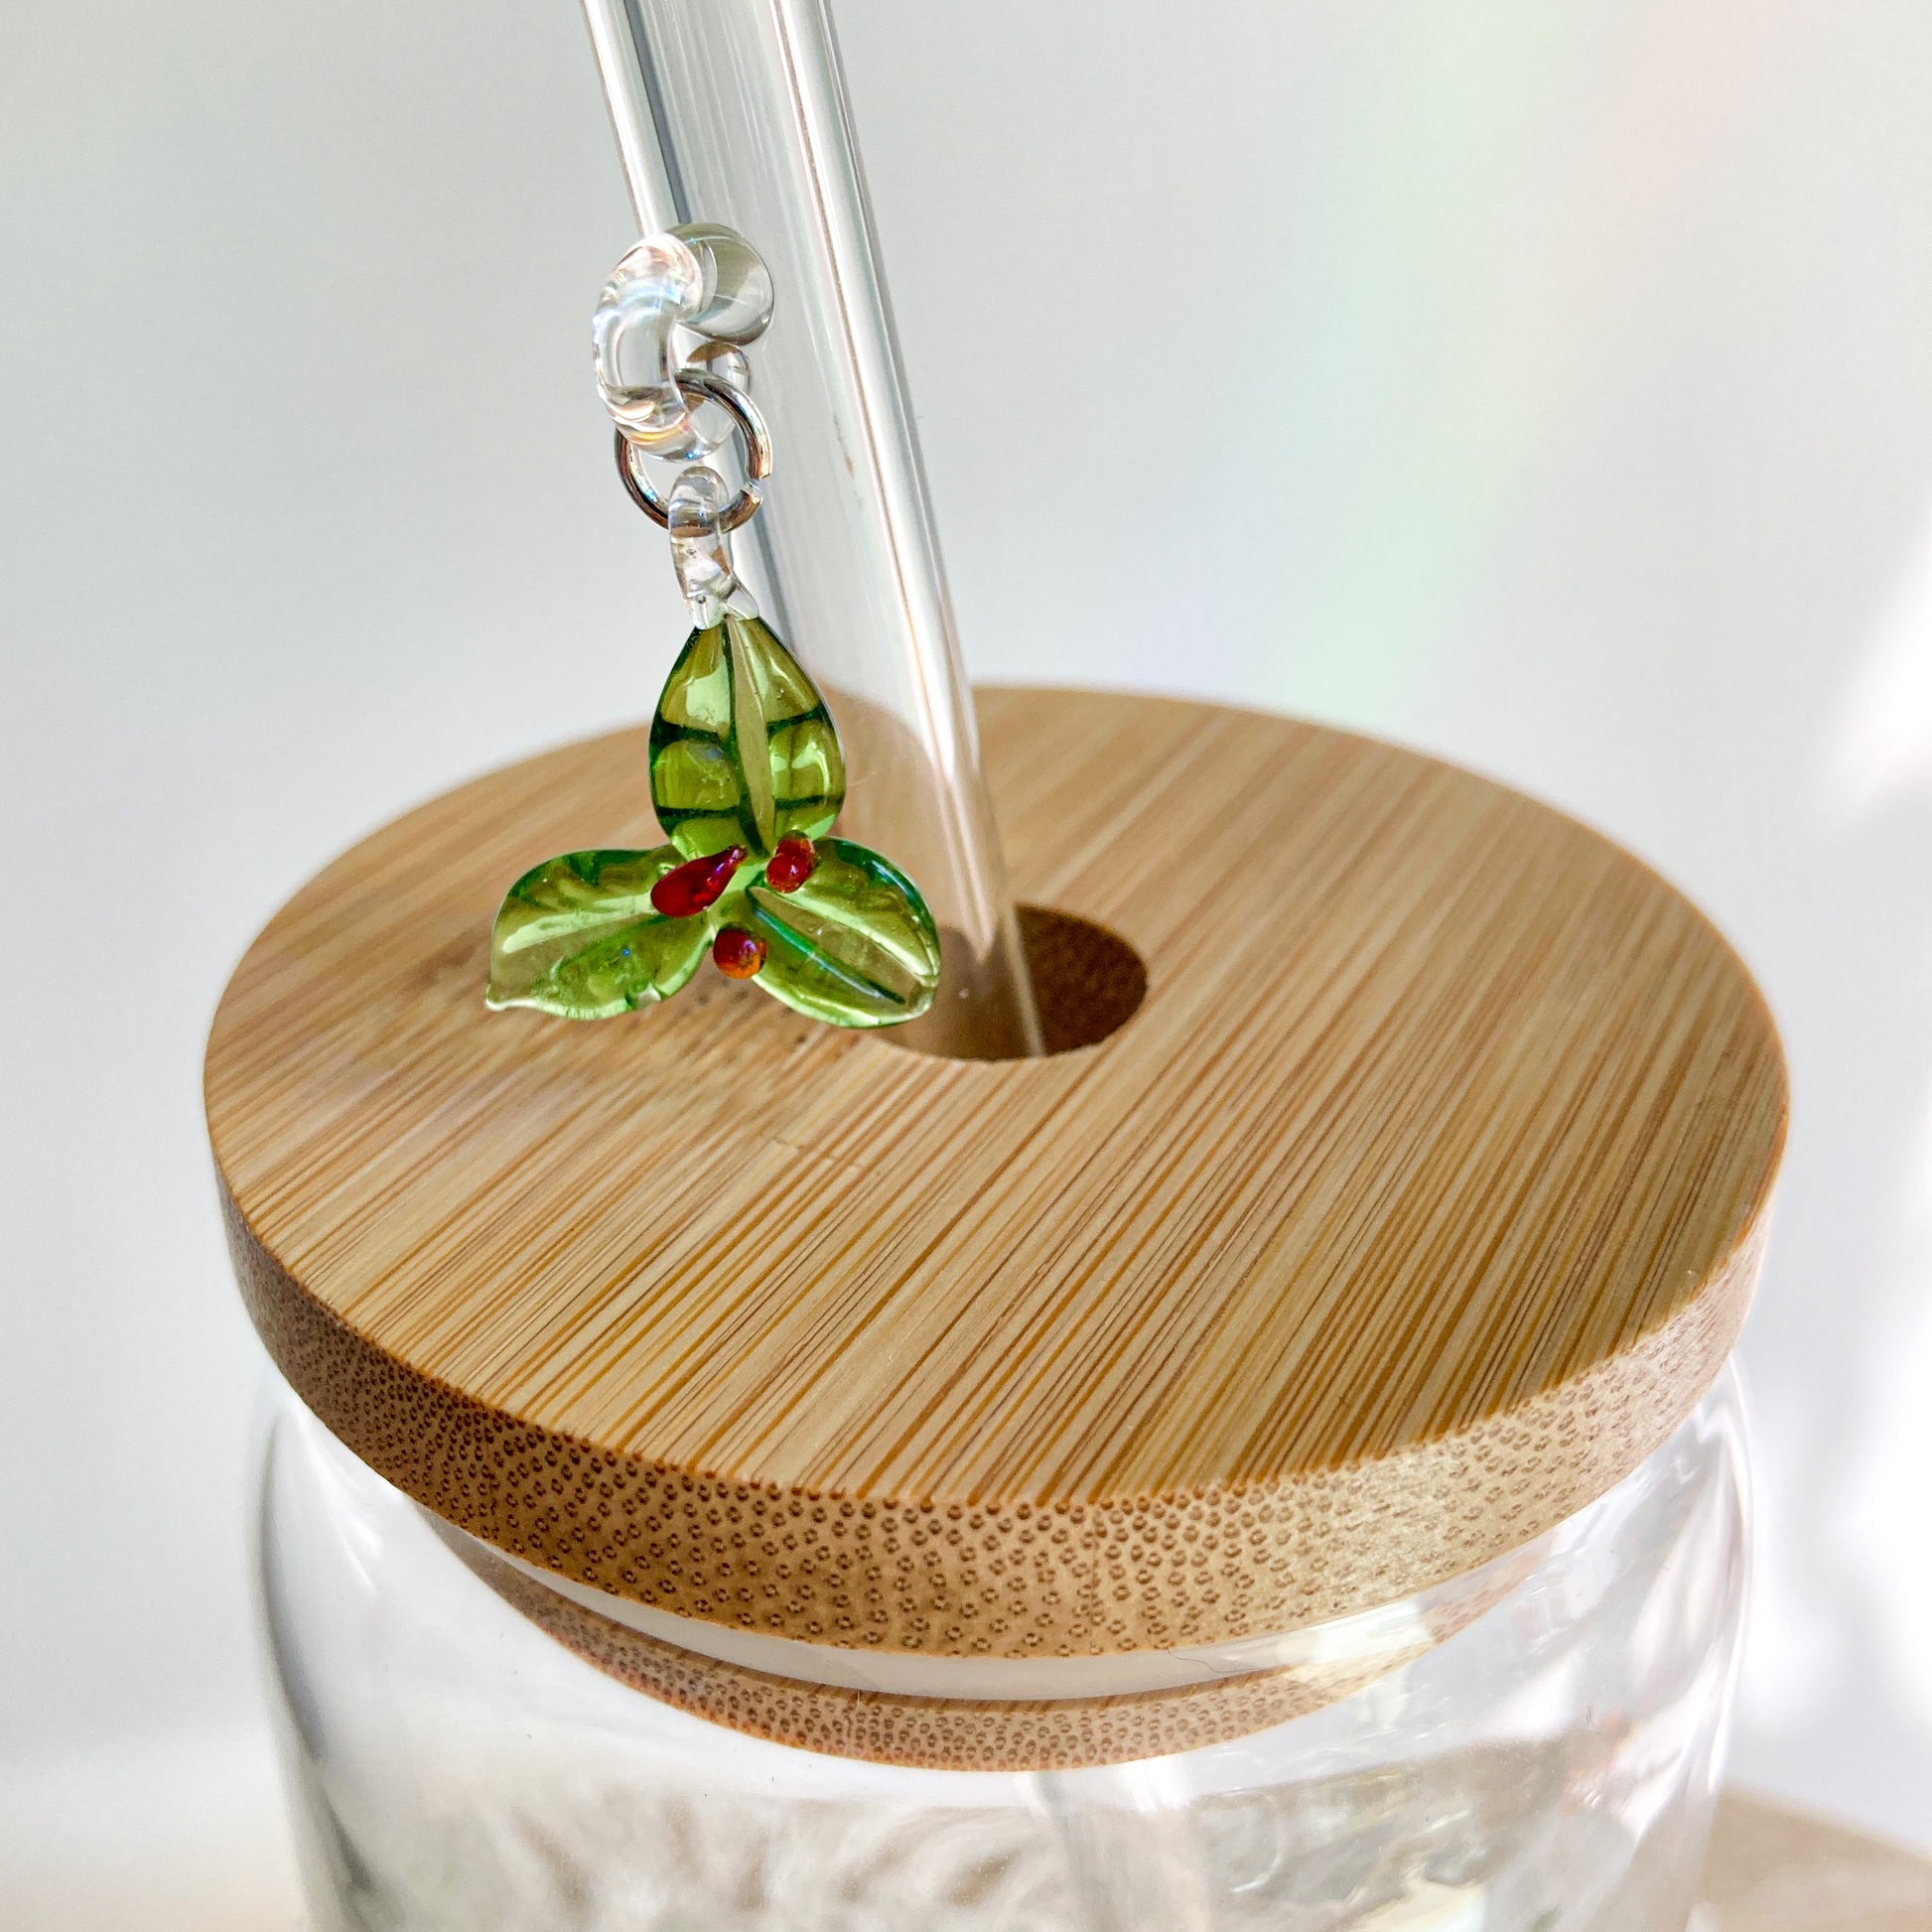 Glass Straw With Christmas Charm